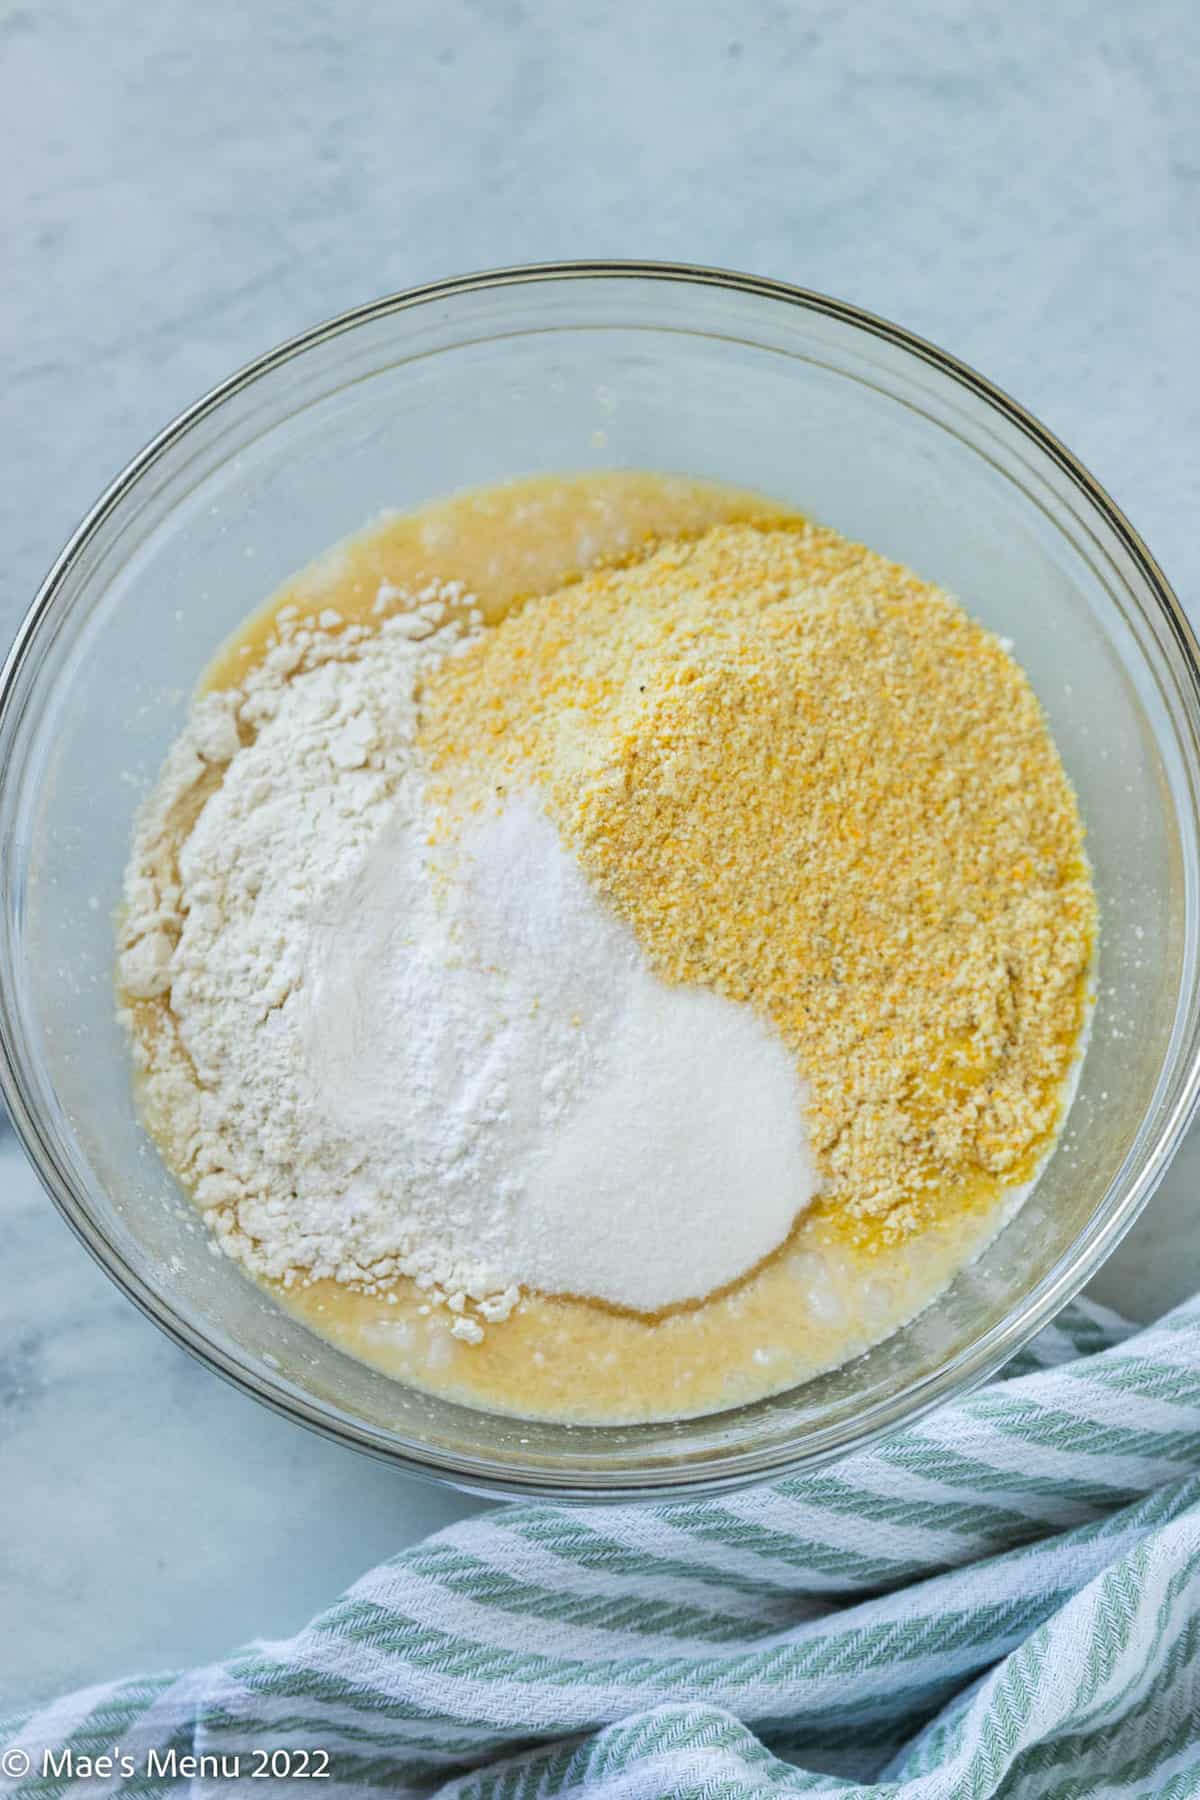 A glass bowl of cornmeal, flour, sugar, and other ingredients for cornbread without milk.